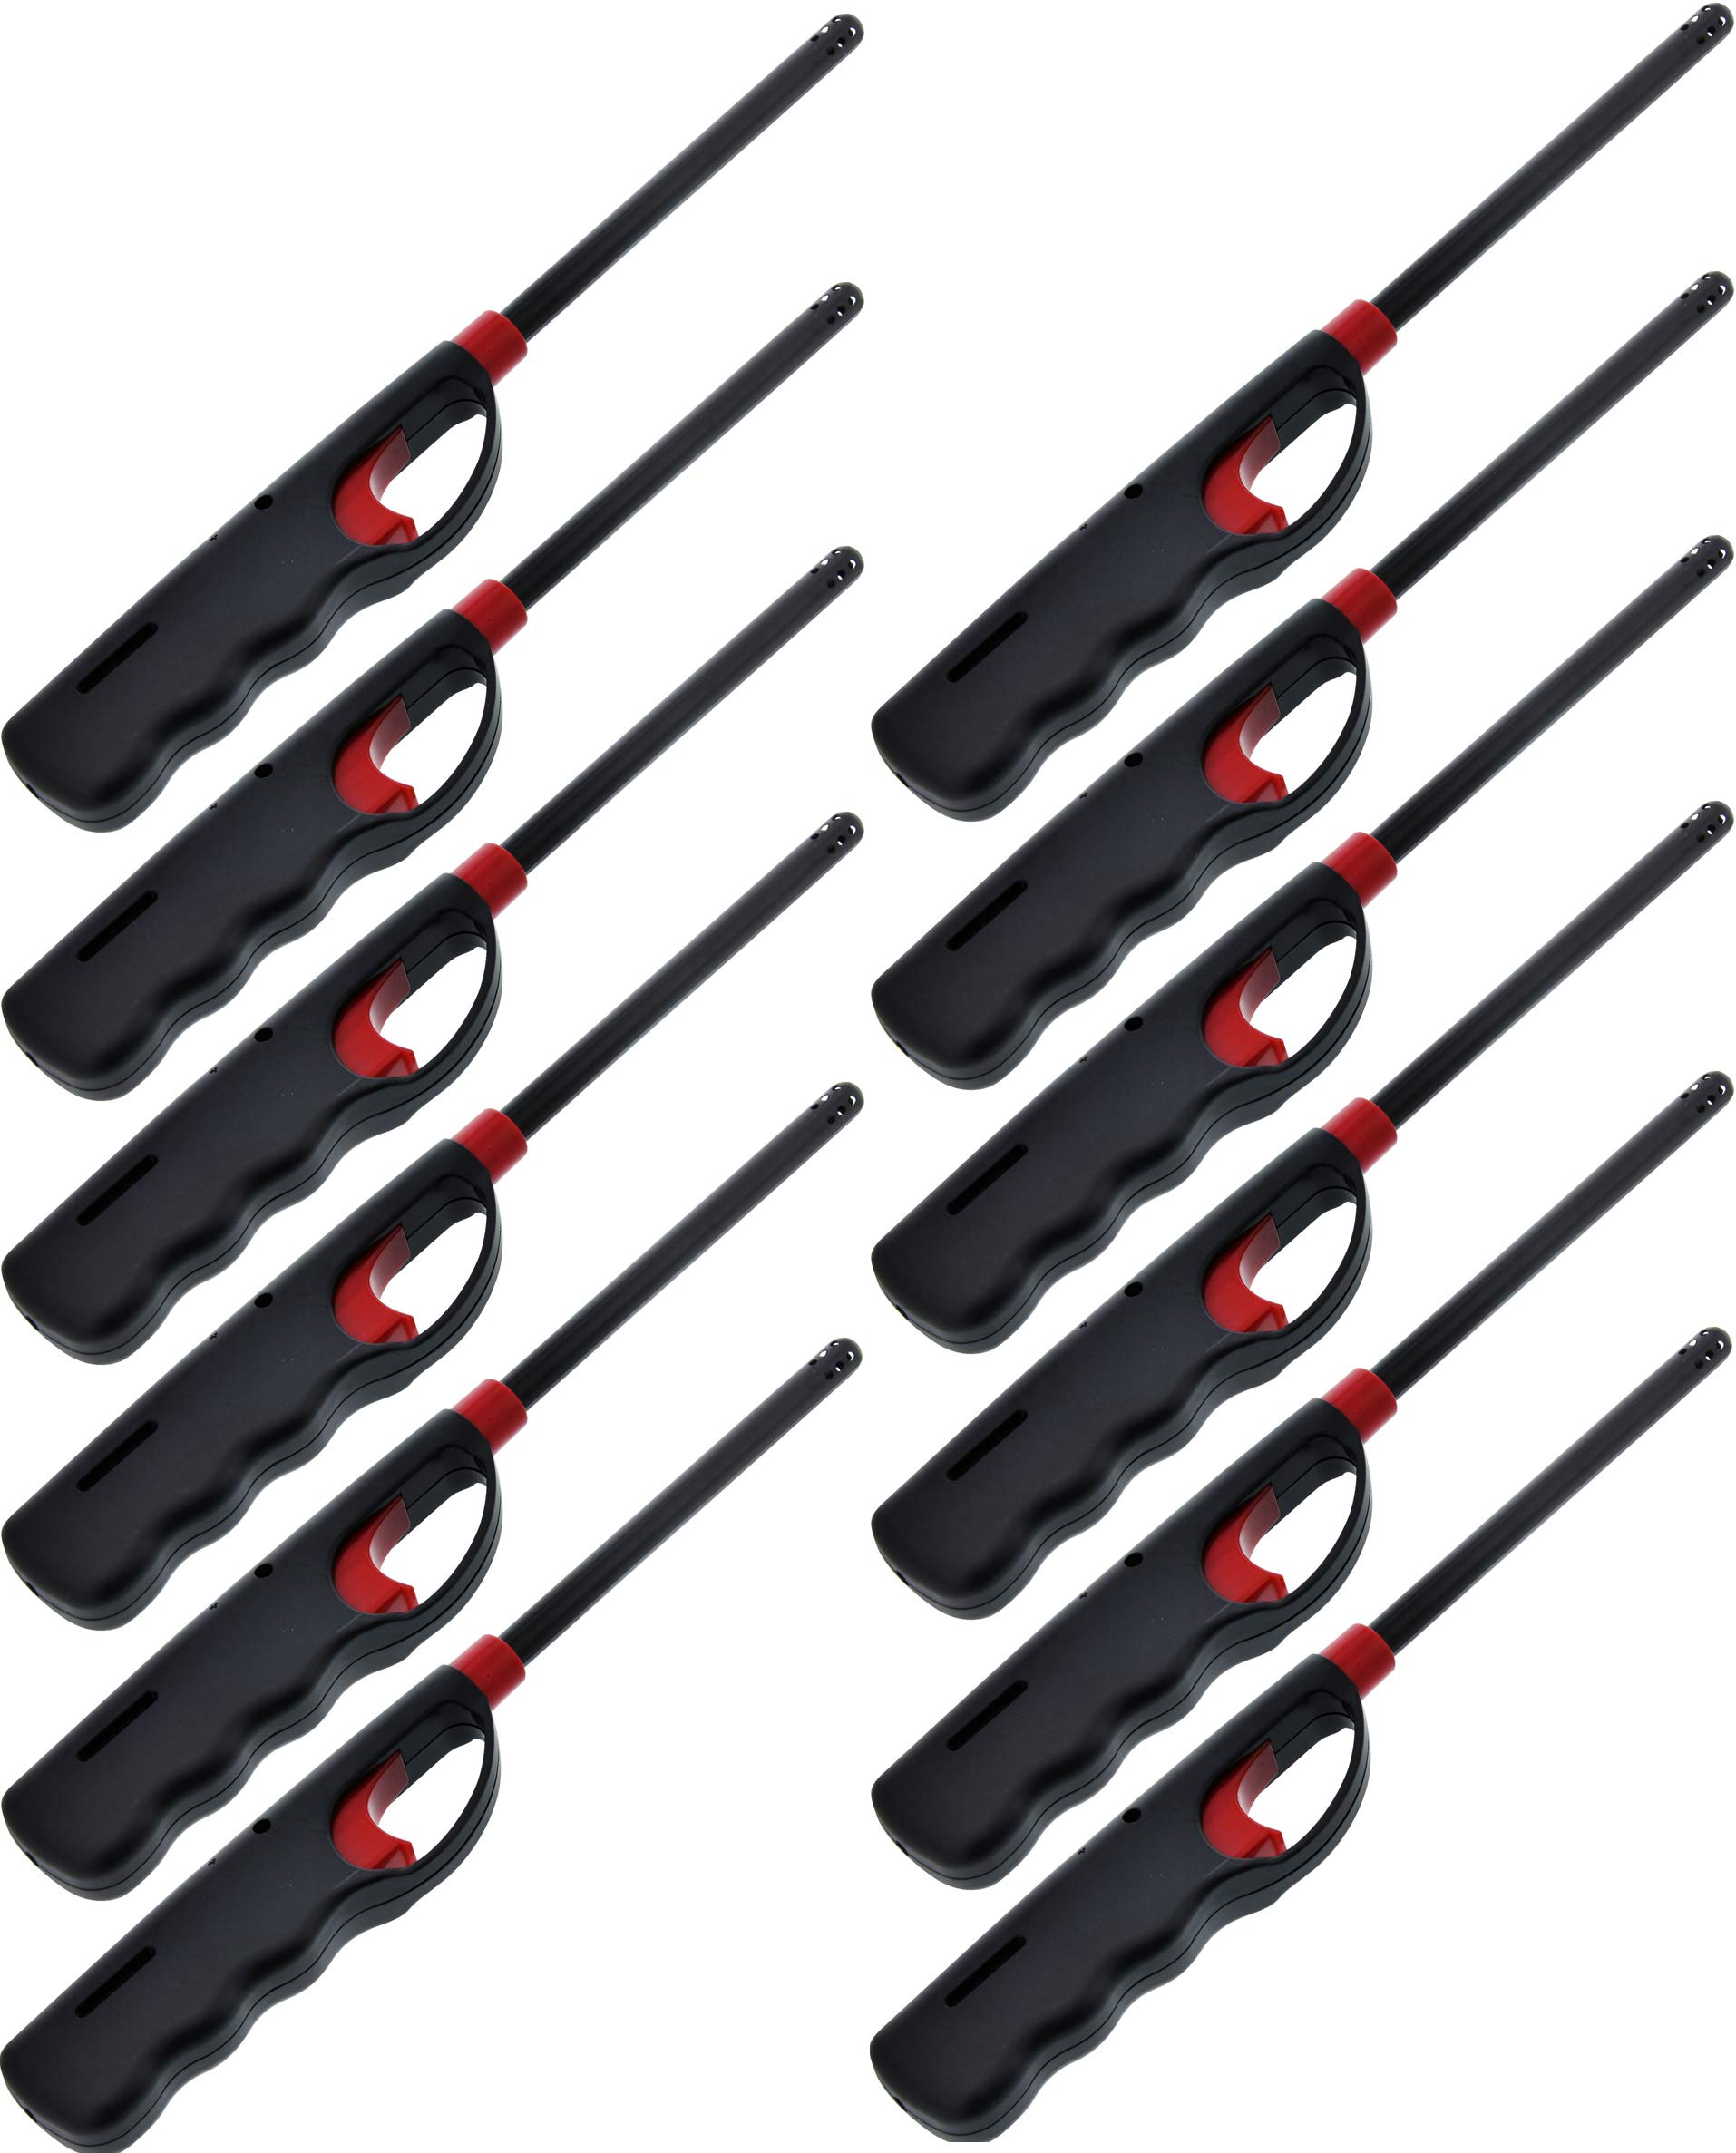 12 Pack - VIP Home Essentials Fuel Included Handi Flame BBQ Grill Click Stick Lighter Refillable Candle Fireplace Kitchen Stove Wind Resitent Long Stem